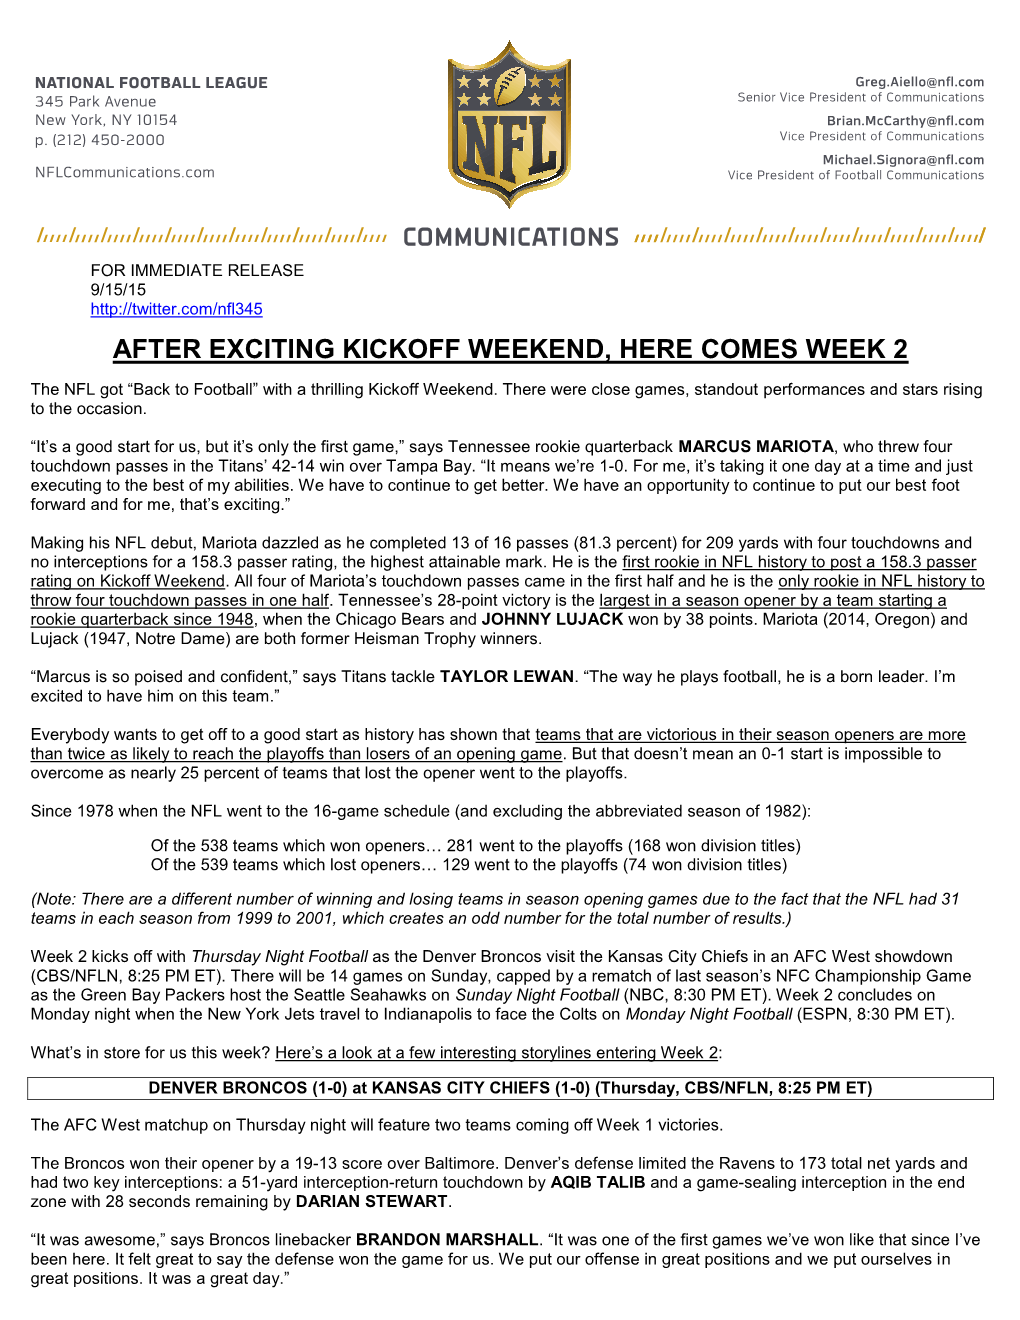 After Exciting Kickoff Weekend, Here Comes Week 2